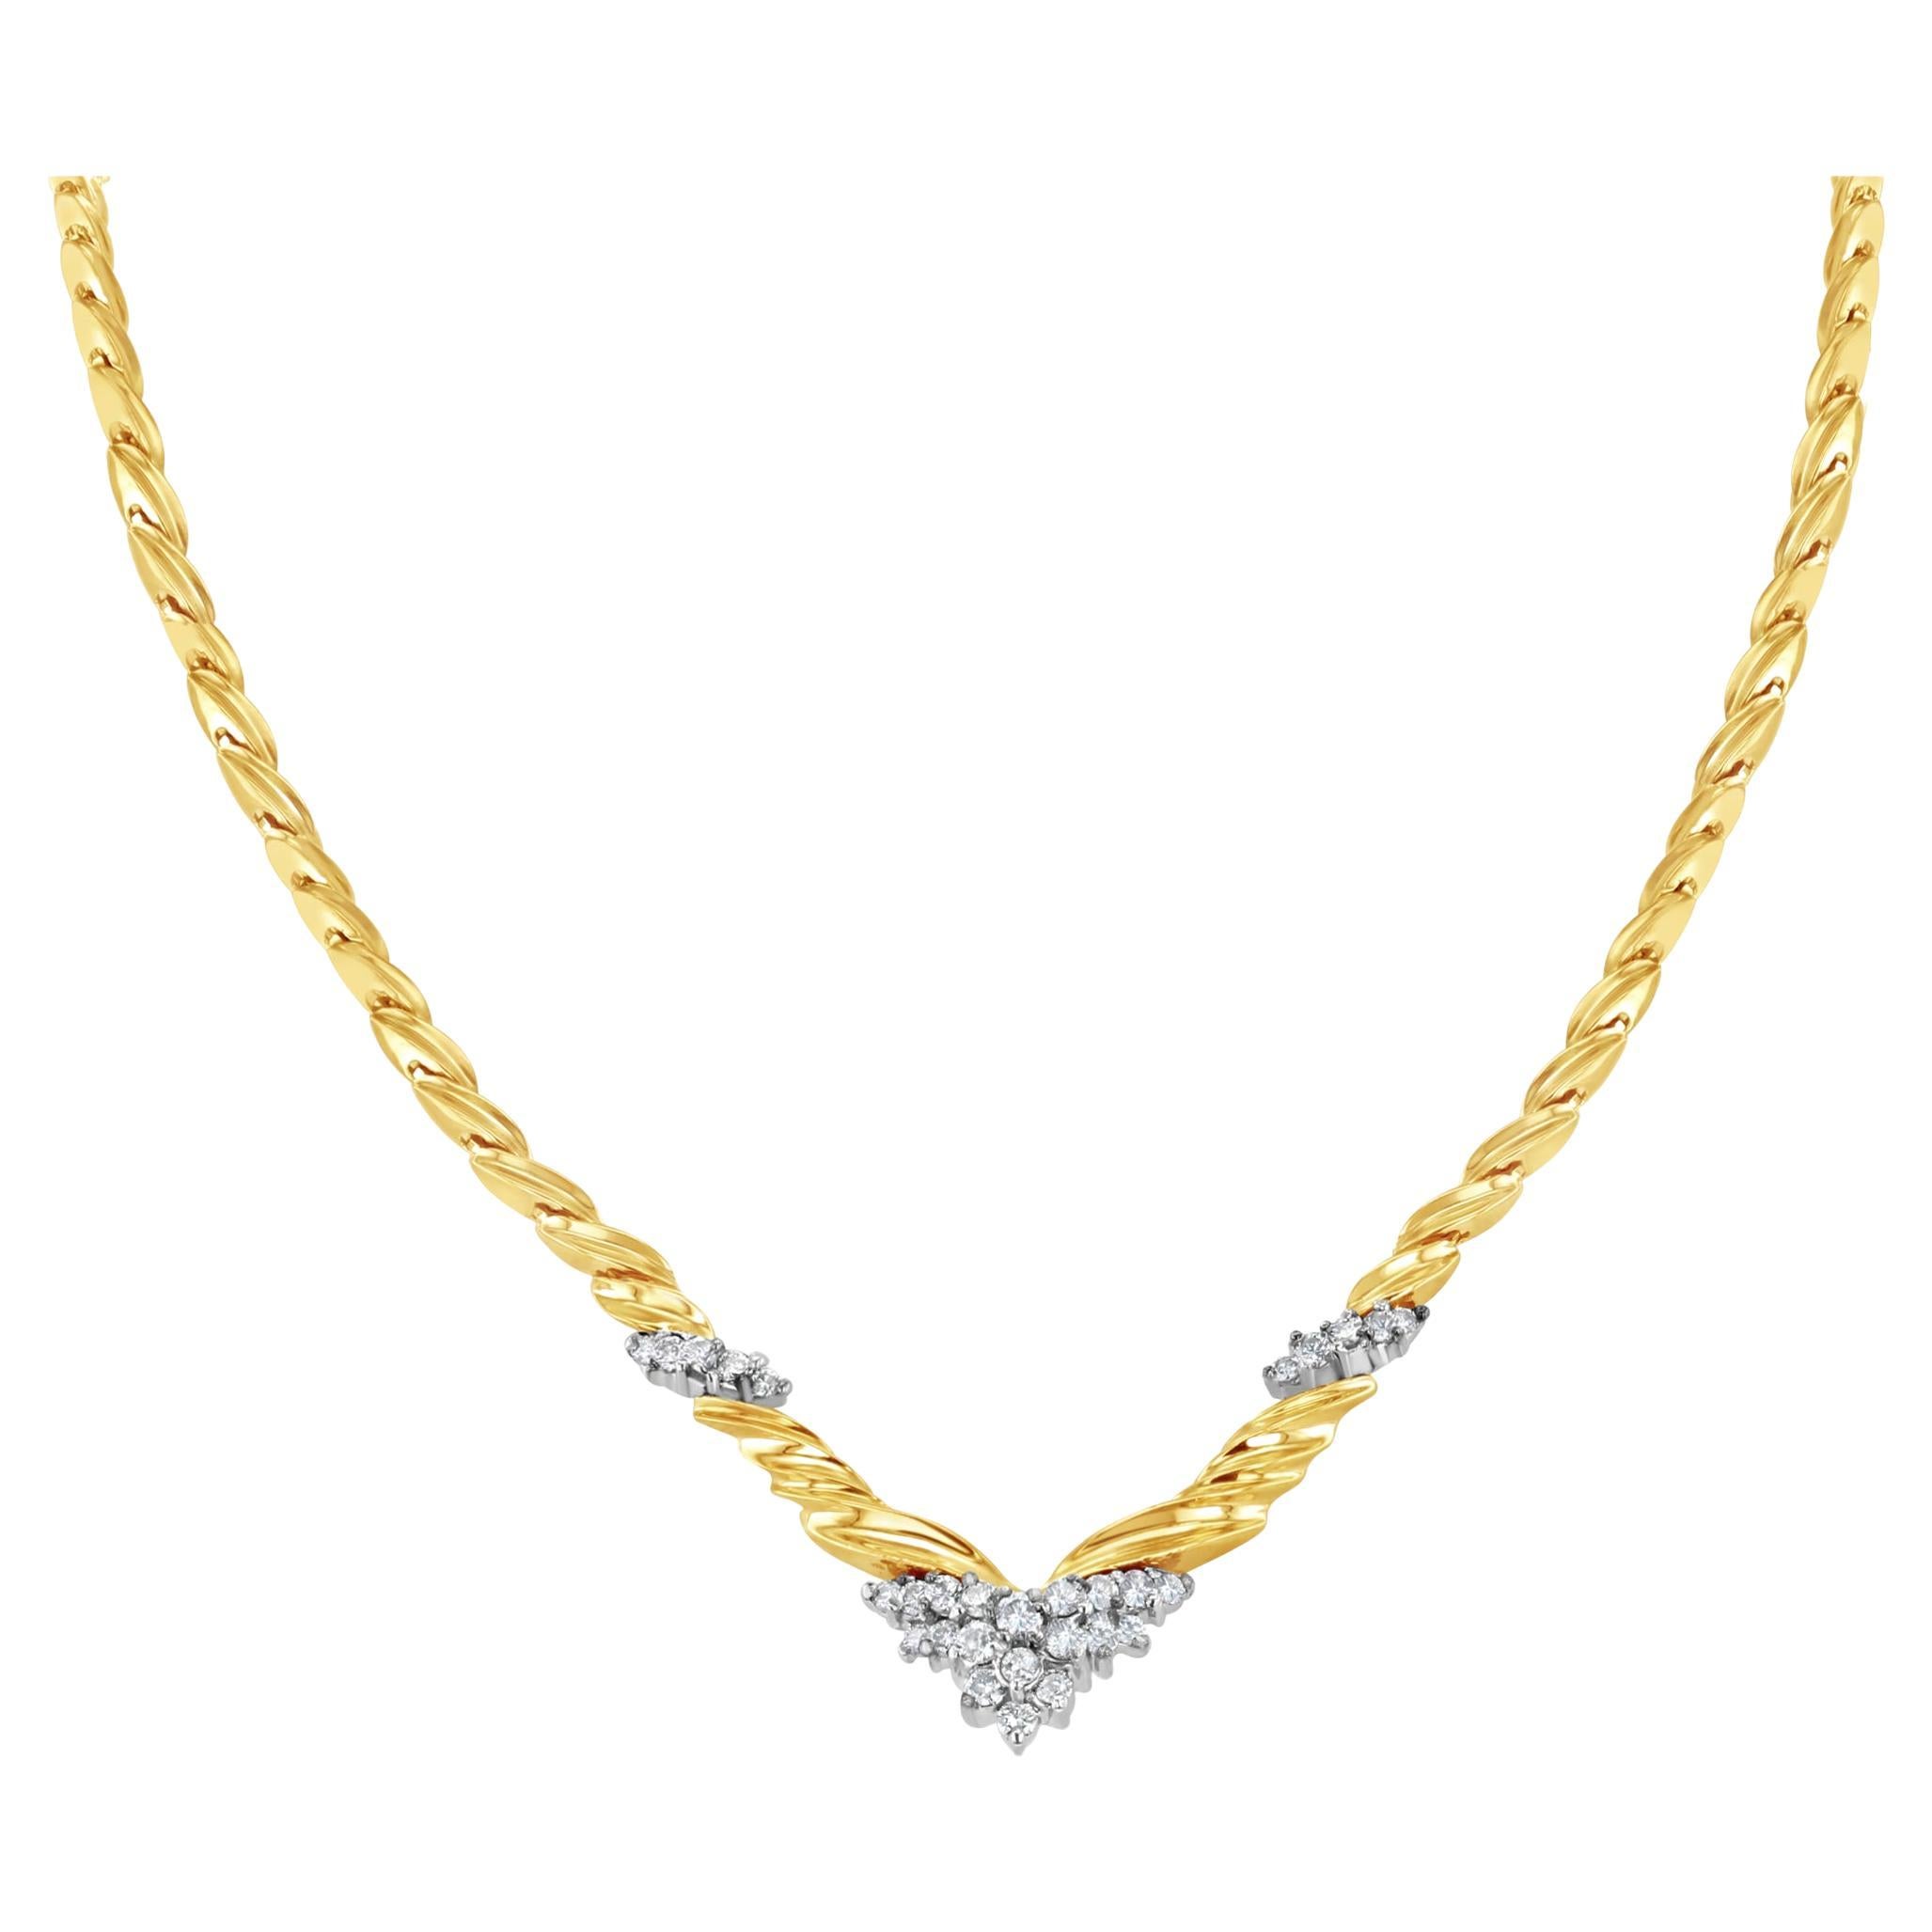 'V' Shaped Two-Toned Diamond Vintage Style Necklace 1.00cttw 14k Yellow Gold